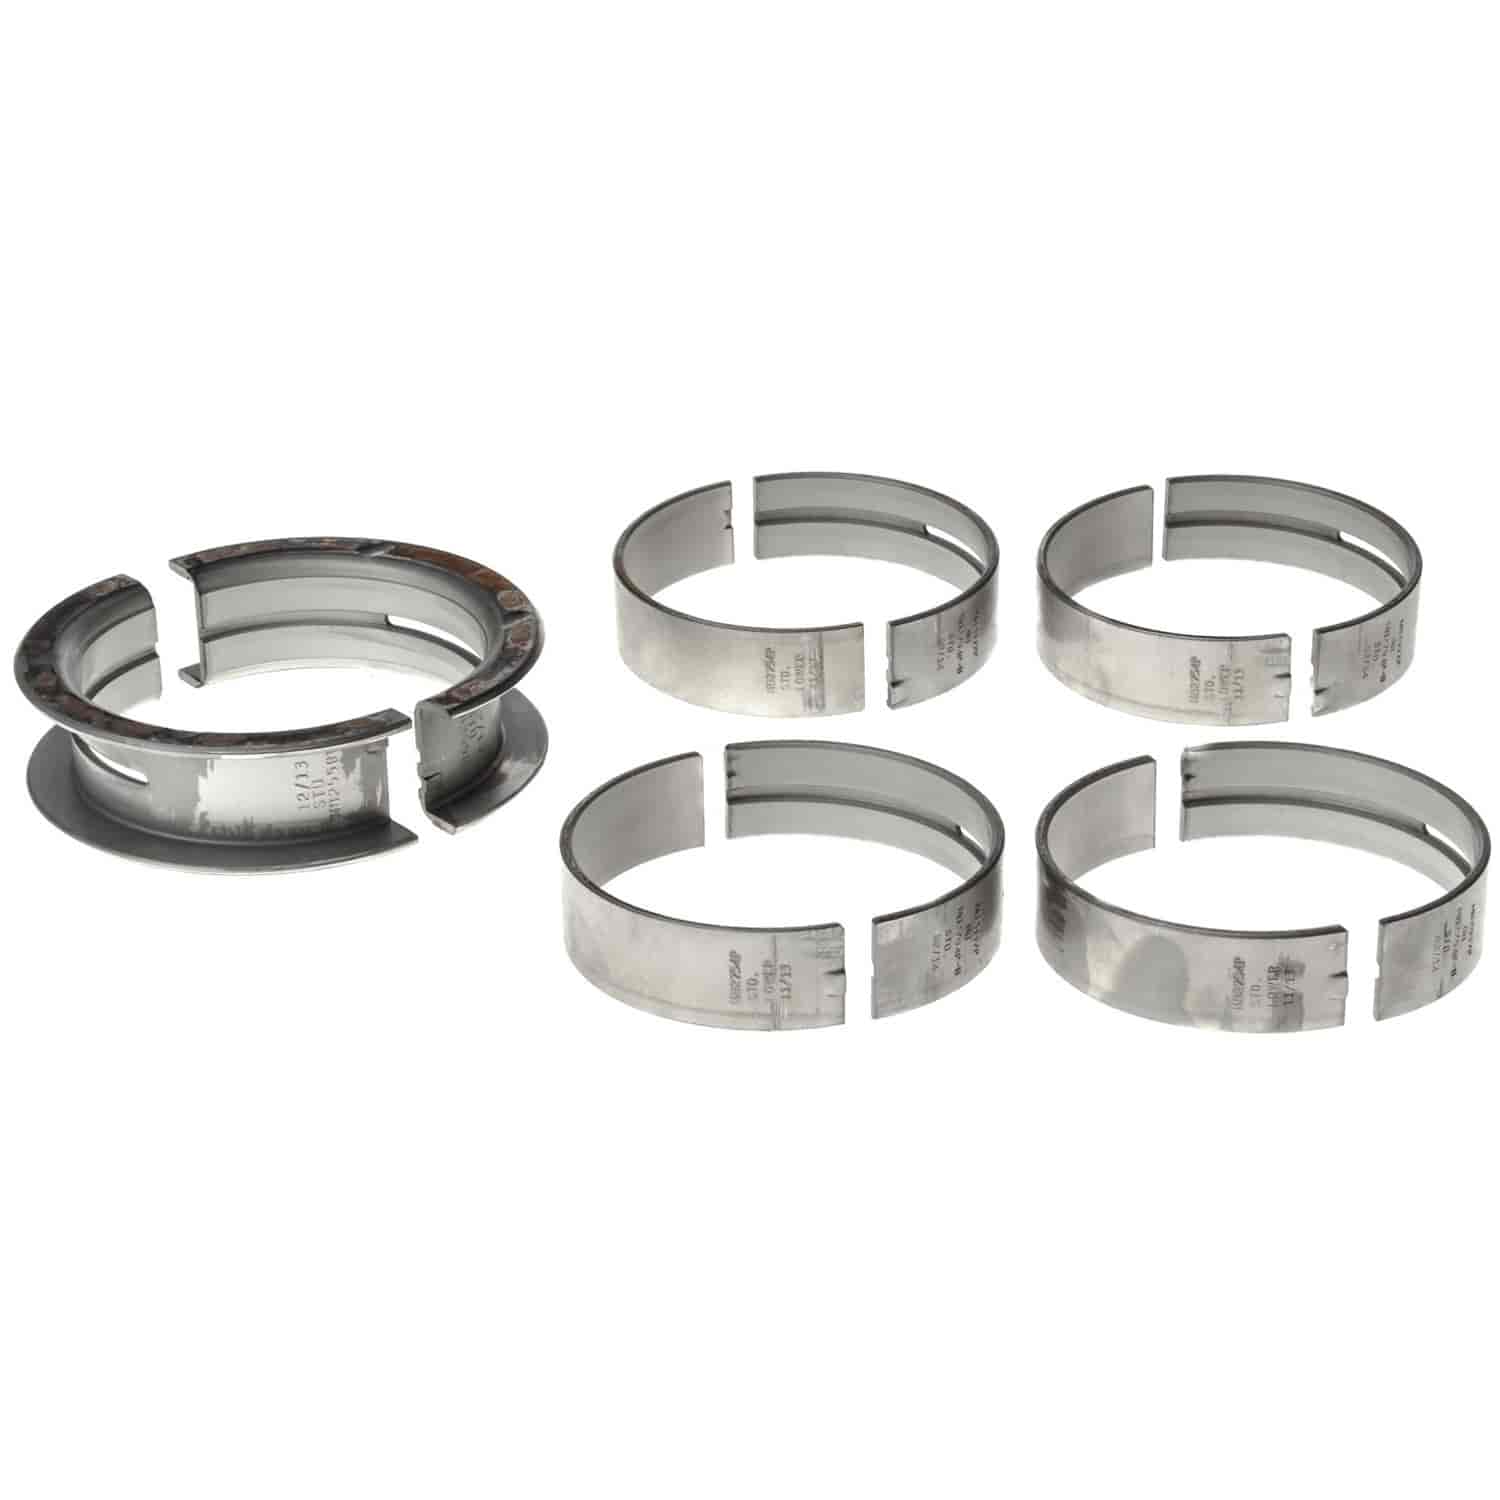 Main Bearing Set Ford 1971-1997 V8 351W/351M/400 (5.8/6.6L) with -.010" Undersize